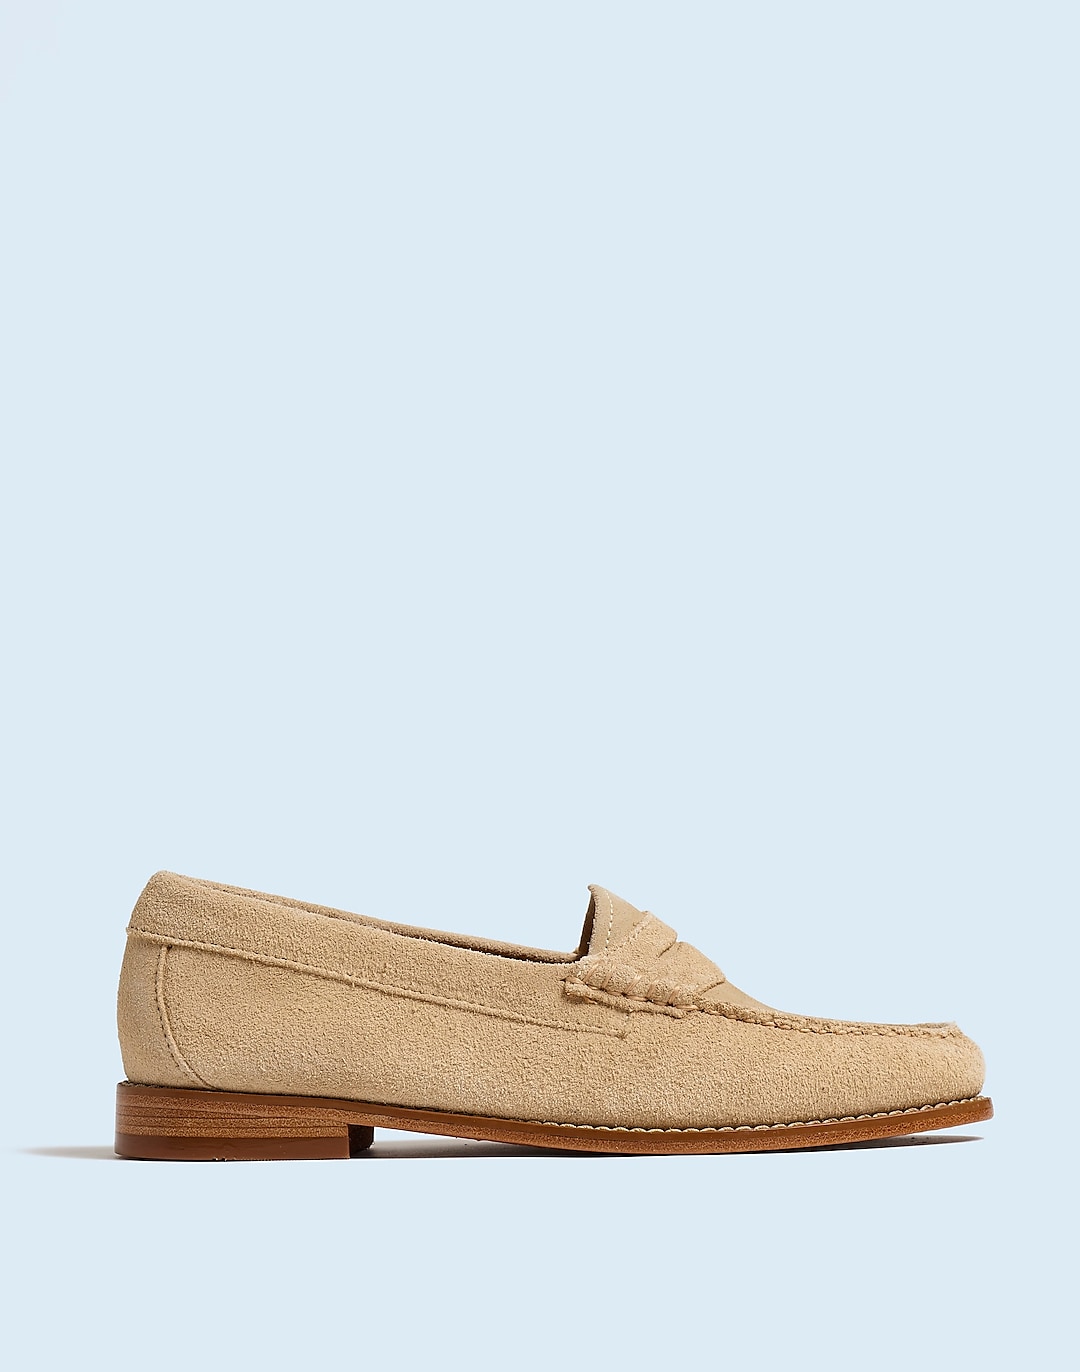 Madewell x G.H.BASS Whitney Weejuns® Loafers | Madewell